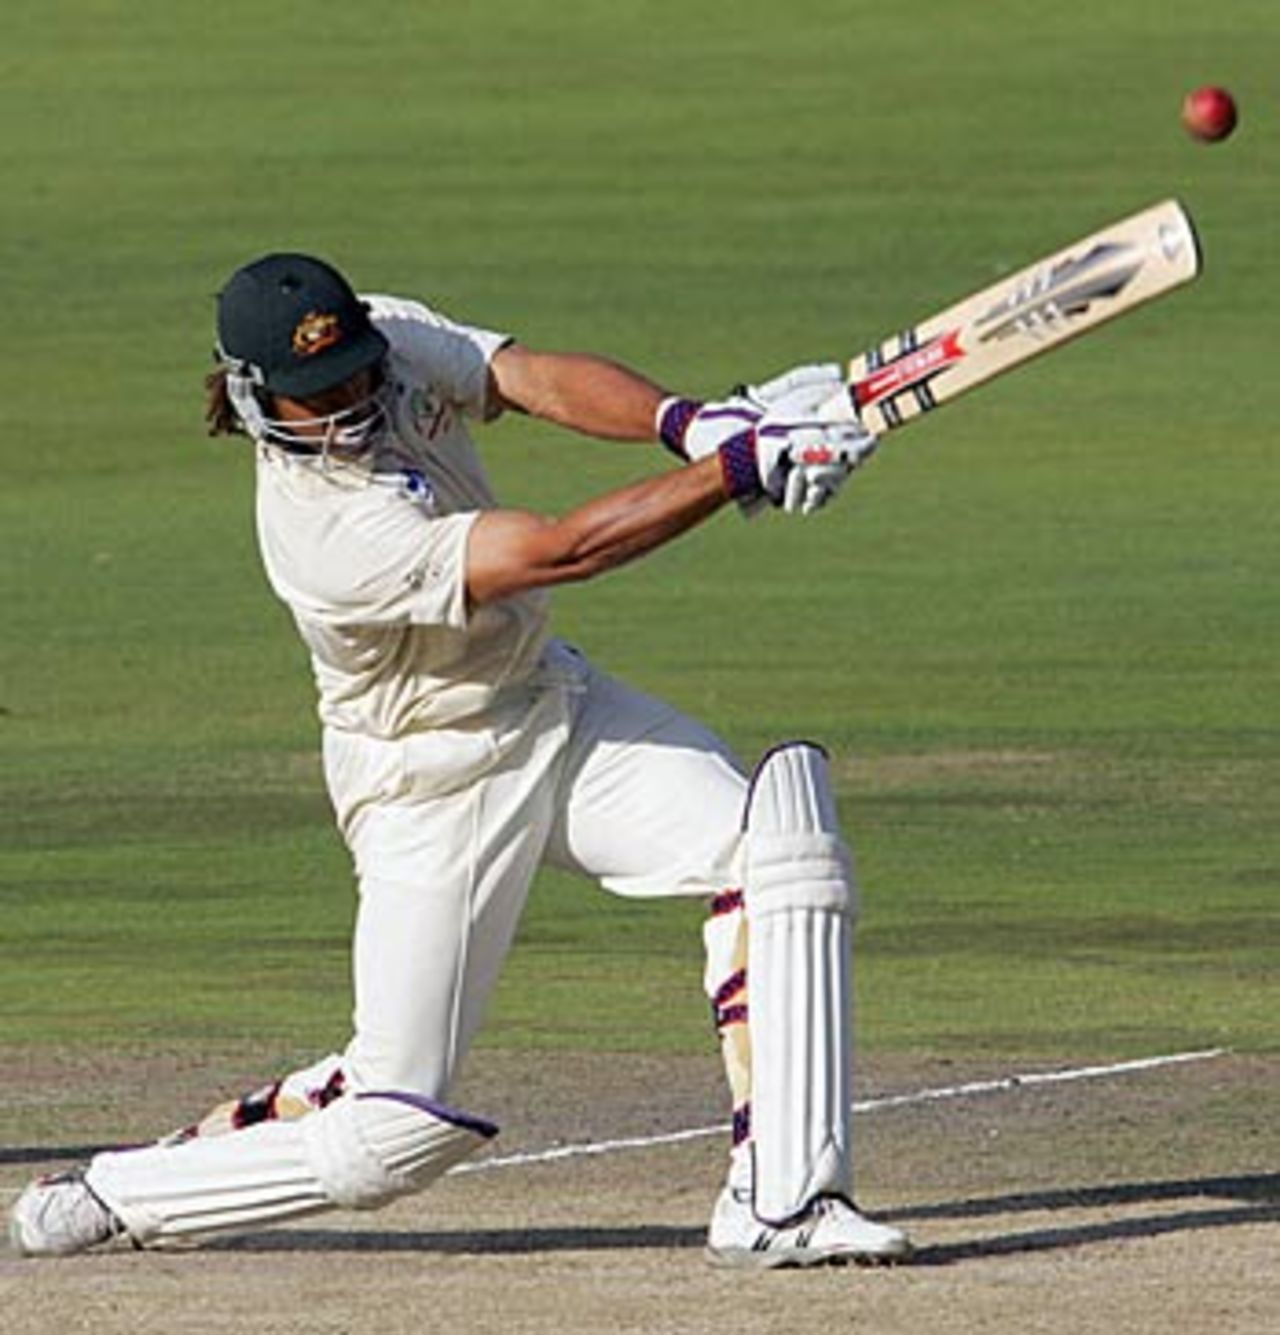 Andrew Symonds cracked a rapid 29 off 26 balls but fell to bring South Africa back into the contest, South Africa v Australia, 3rd Test, Johannesburg, April 3, 2006